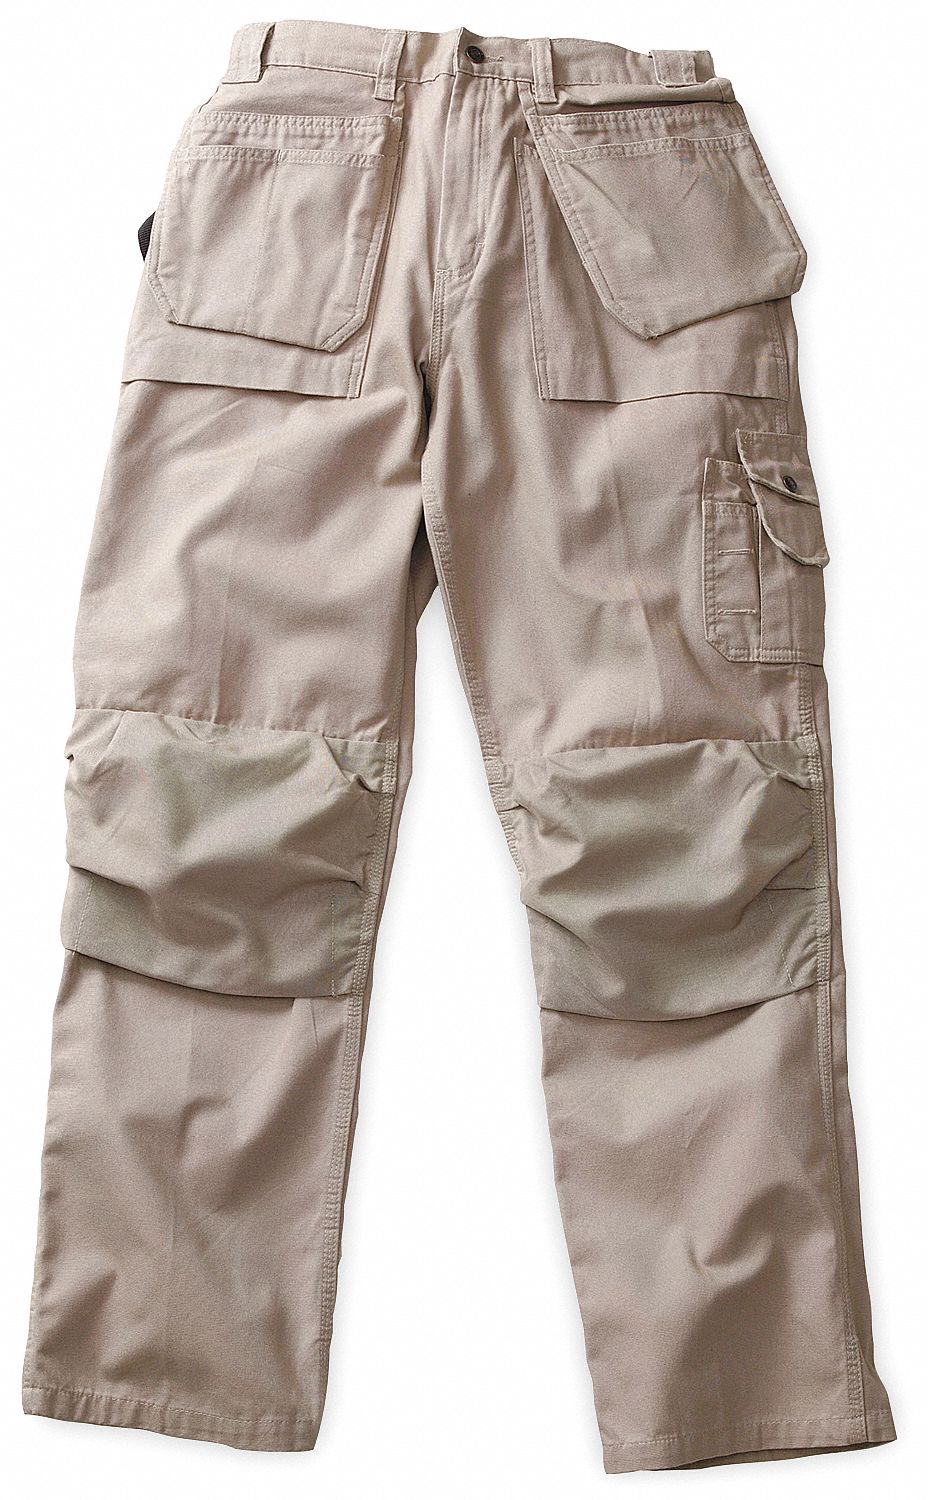 GRAINGER APPROVED Pants, Stone, Size 38x34 In - 3XLW6|1630-1310-2700 ...